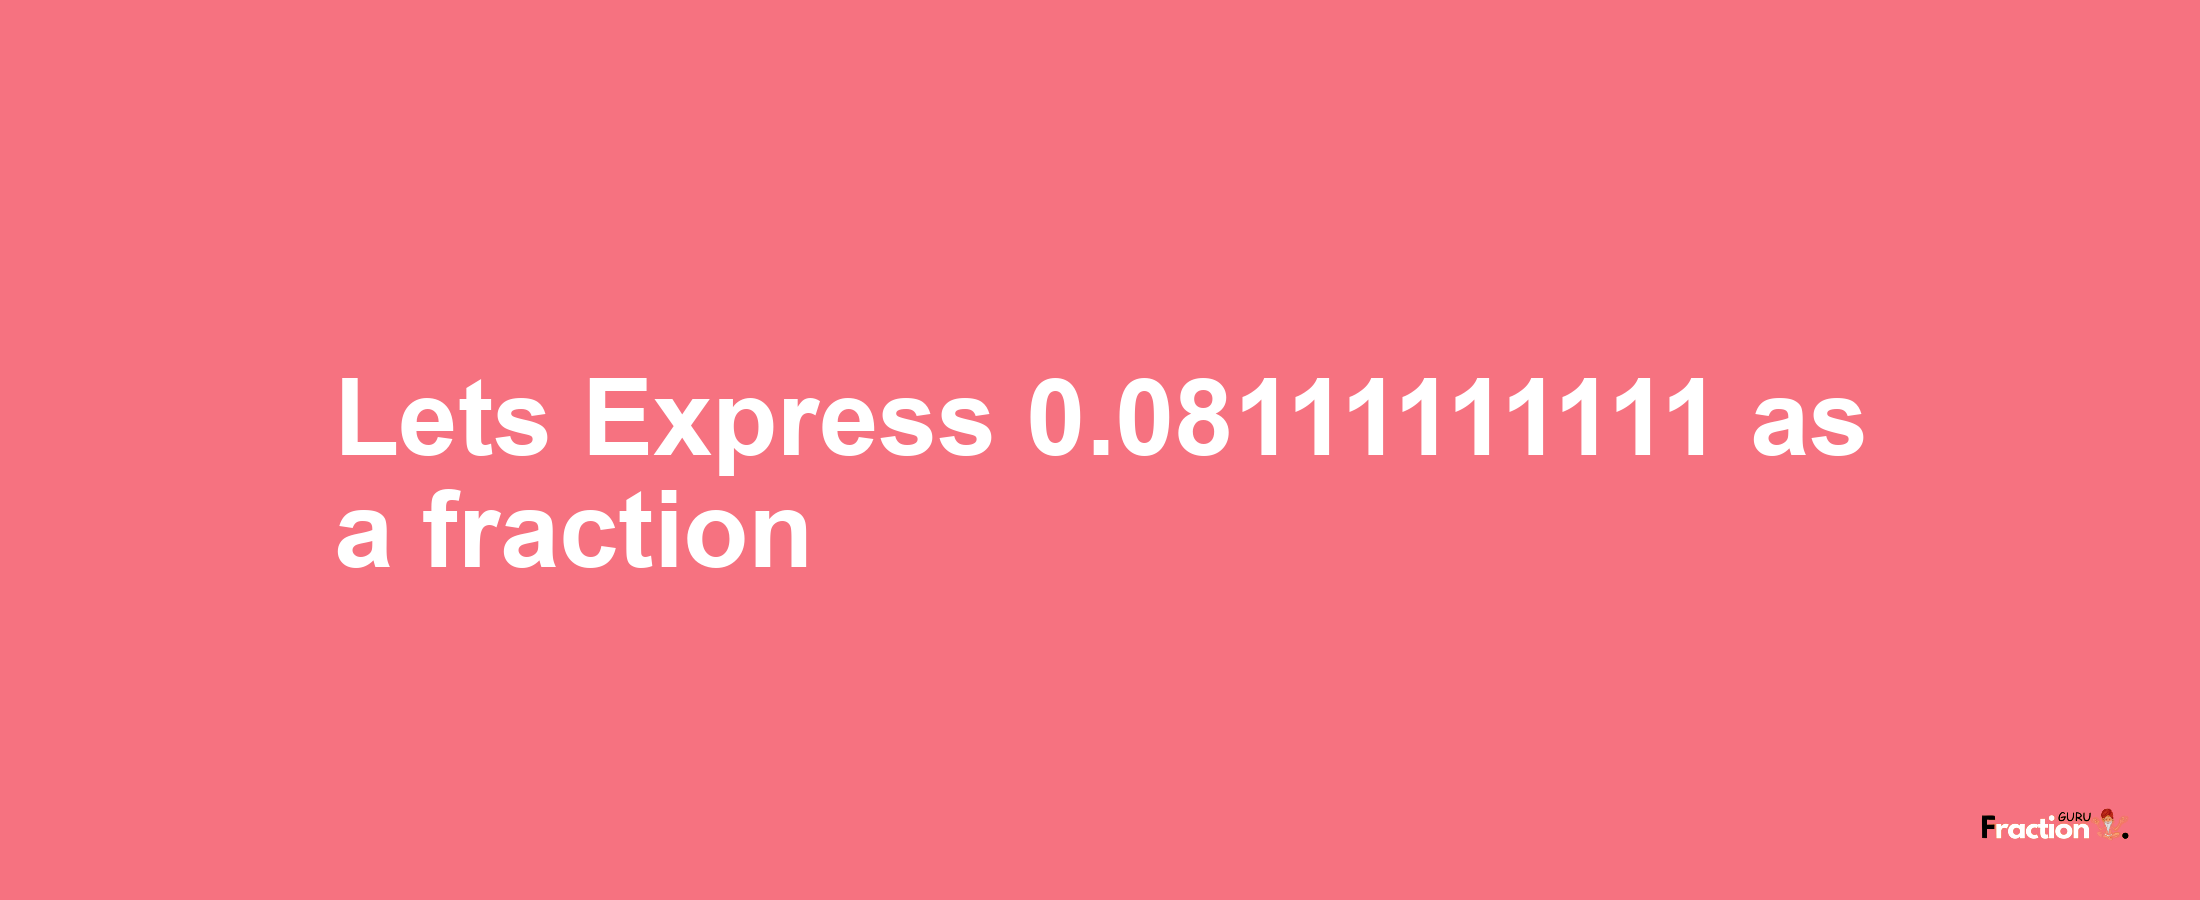 Lets Express 0.08111111111 as afraction